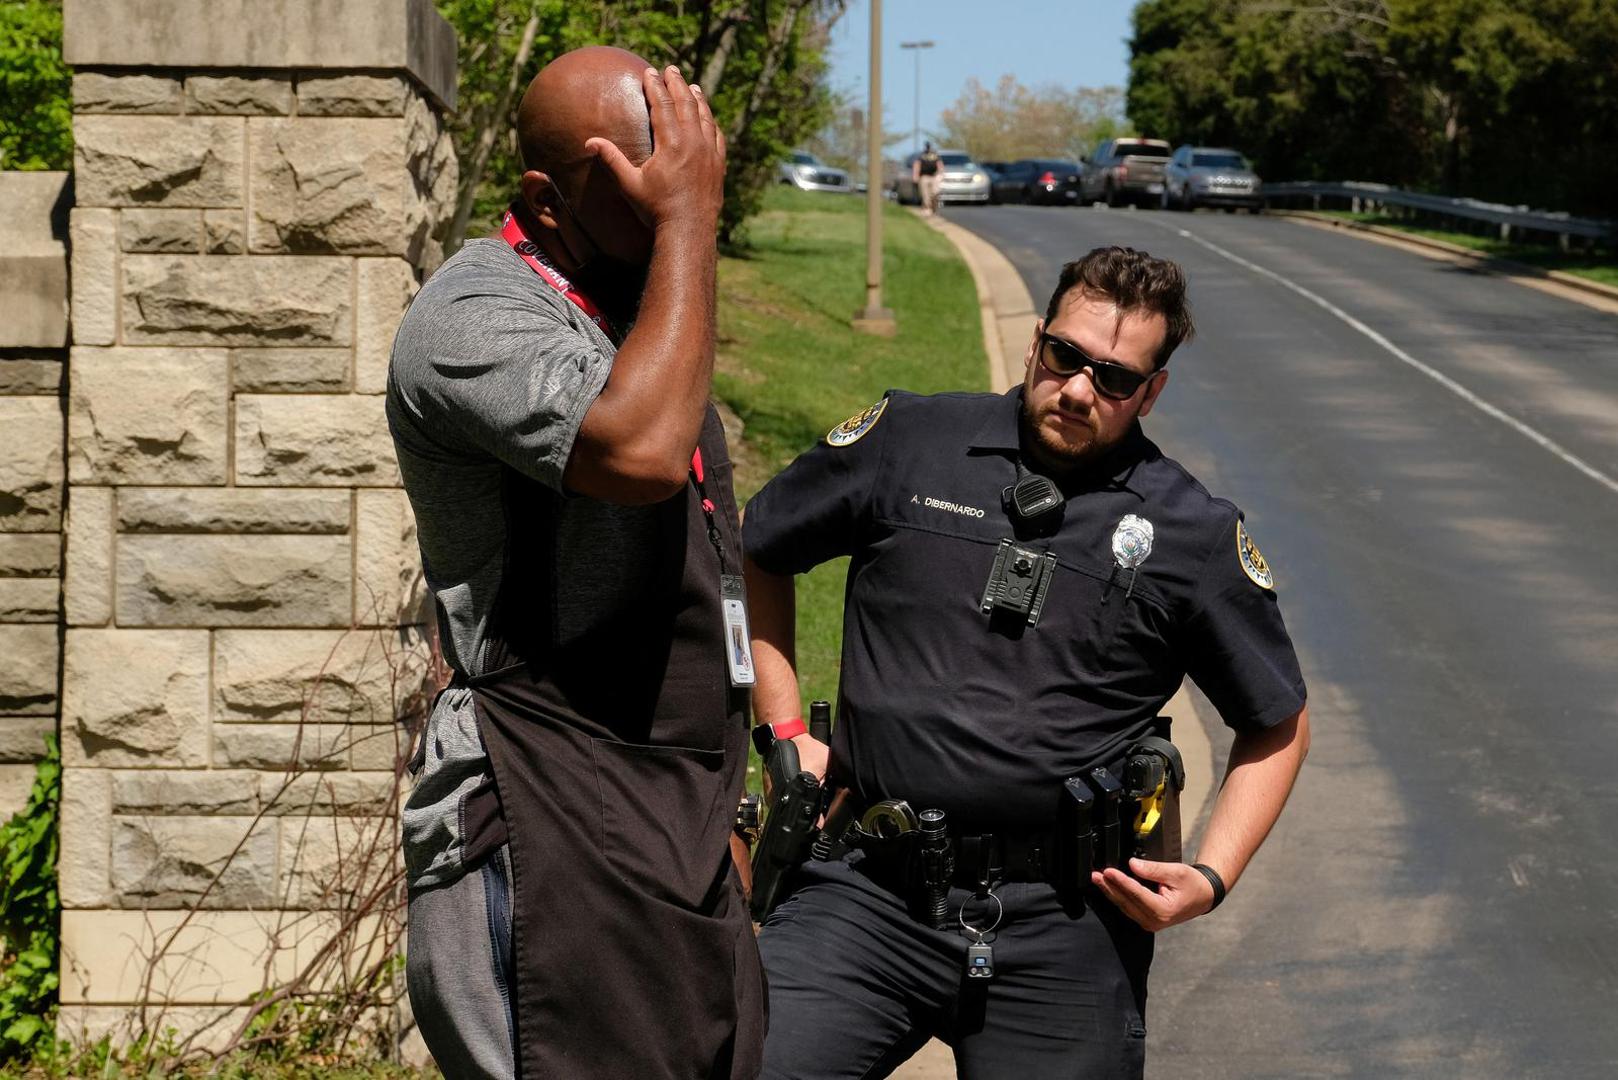 Mario Dennis, one of the kitchen staff at the Covenant School, reacts near a police officer after a shooting at the facility in Nashville, Tennessee, U.S. March 27, 2023.  REUTERS/Kevin Wurm  NO RESALES. NO ARCHIVES Photo: KEVIN WURM/REUTERS